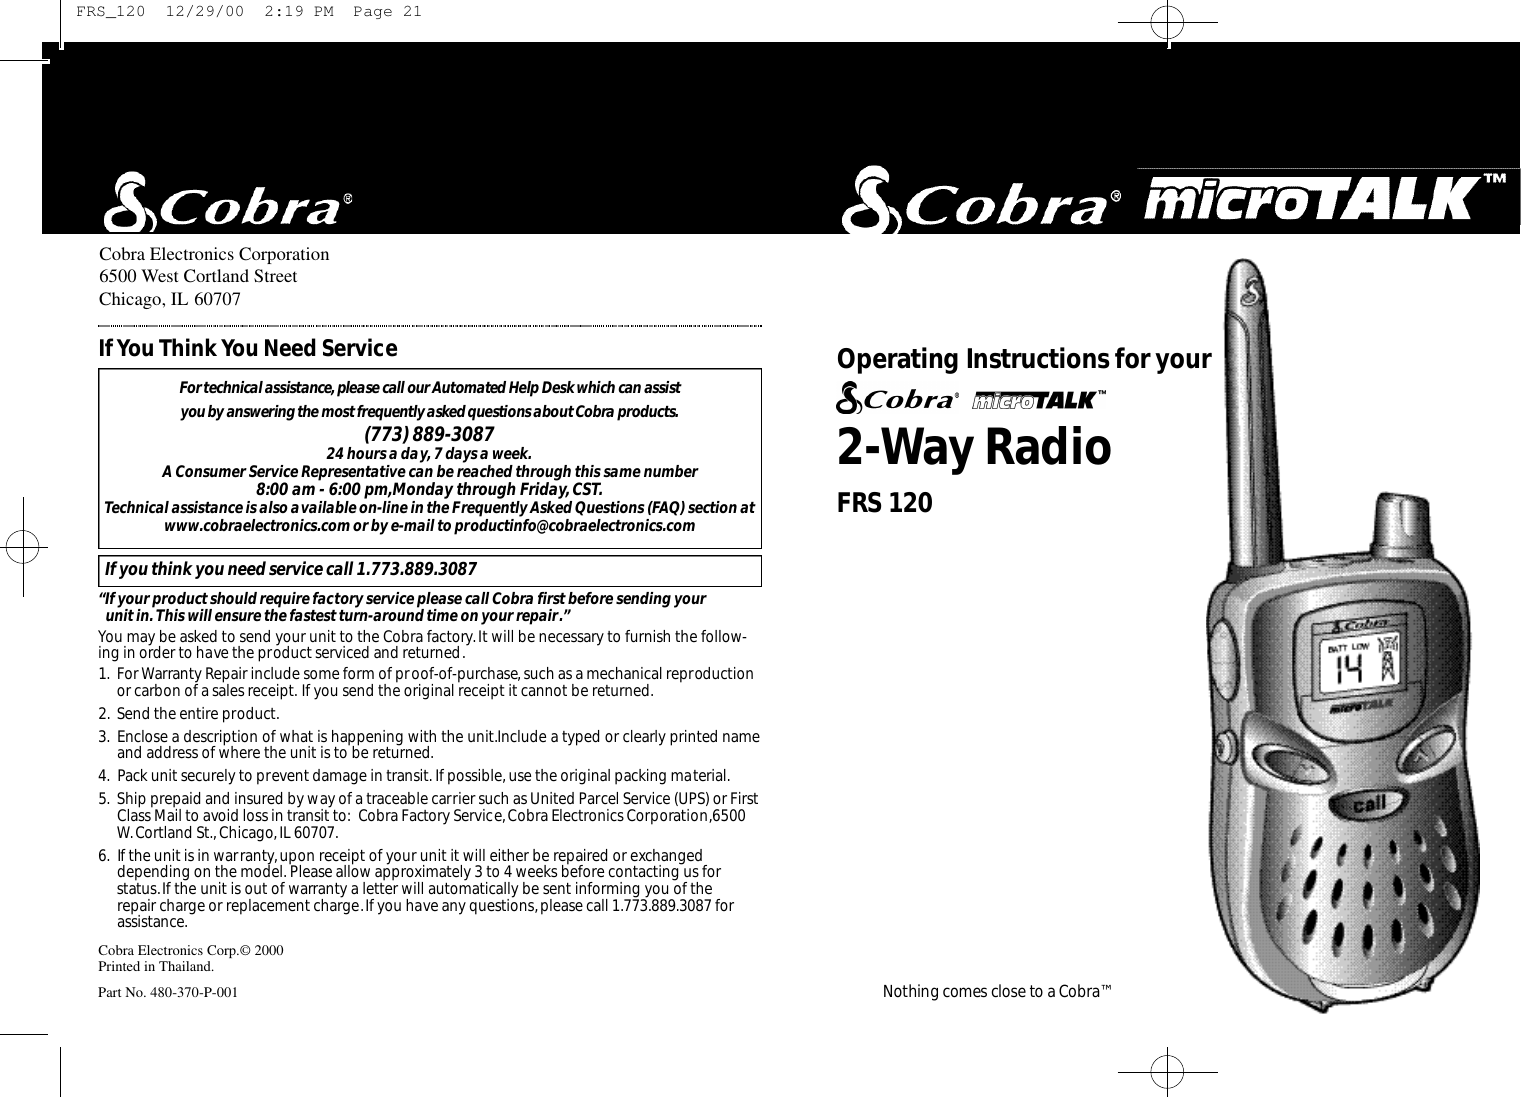 2-Way RadioO pe rating Instru ctions for your Nothing comes close to a Co b ra ™Cobra Electronics Corporation6500 West Cortland StreetChicago, IL 60707Cobra Electronics Corp.© 2000Printed in Thailand.Part No. 480-370-P-001For te c h n i c al assistance,please call our Au to m a ted Help Desk which can assist you by answering the most fre q u e n t l y asked questions about Co b ra prod u ct s.(773) 889-3087 24 hours a day, 7 days a week.A Consumer Service Representative can be reached through this same number 8:00 am - 6:00 pm,Monday through Friday,CST.Technical assistance is also available on-line in the Frequently Asked Questions (FAQ) section atwww.cobraelectronics.com or by e-mail to productinfo@cobraelectronics.comIf you think you need service call 1.773.889.3087“If your product should require factory service please call Cobra first before sending your unit in. This will ensure the fastest turn-around time on your repair.”You may be asked to send your unit to the Cobra factory.It will be necessary to furnish the follow-ing in order to have the product serviced and returned.1. For Warranty Repair include some form of proof-of-purchase, such as a mechanical reproductionor carbon of a sales receipt. If you send the original receipt it cannot be returned.2. Send the entire product.3. Enclose a description of what is happening with the unit.Include a typed or clearly printed nameand address of where the unit is to be returned.4. Pack unit securely to prevent damage in transit. If possible, use the original packing material.5. Ship prepaid and insured by way of a traceable carrier such as United Parcel Service (UPS) or FirstClass Mail to avoid loss in transit to: Cobra Factory Service,Cobra Electronics Corporation,6500W. Cortland St., Chicago,IL 60707.6. If the unit is in warranty, upon receipt of your unit it will either be repaired or exchangeddepending on the model. Please allow approximately 3 to 4 weeks before contacting us for status.If the unit is out of warranty a letter will automatically be sent informing you of the repair charge or replacement charge.If you have any questions,please call 1.773.889.3087 forassistance.If You Think You Need ServiceFRS 120 FRS_120  12/29/00  2:19 PM  Page 21